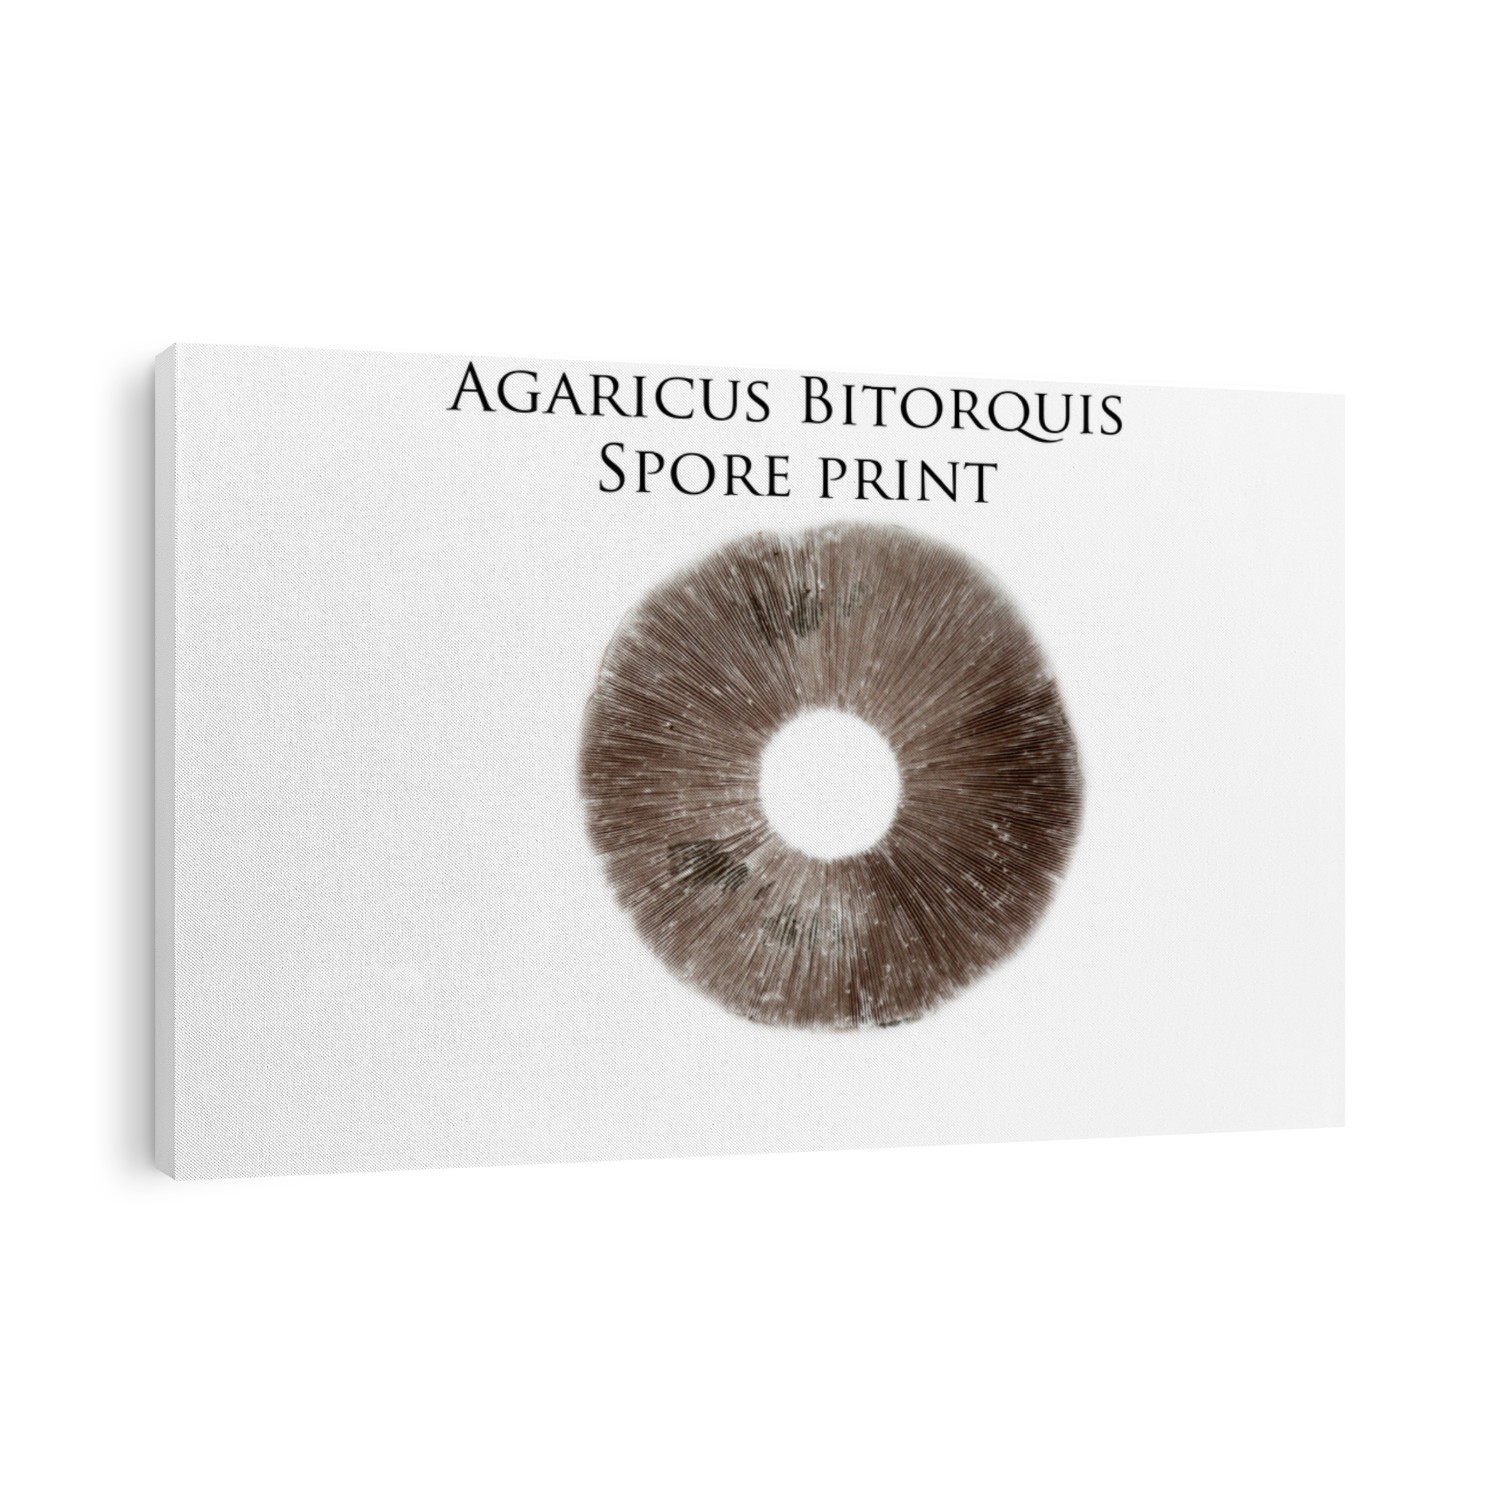 Mushroom Spore Print of the Agaricus Bitorquis. Wild Mushrooms are both edible and highly poisonous depending on the species. Spore Prints are one way to help identify the correct species. 